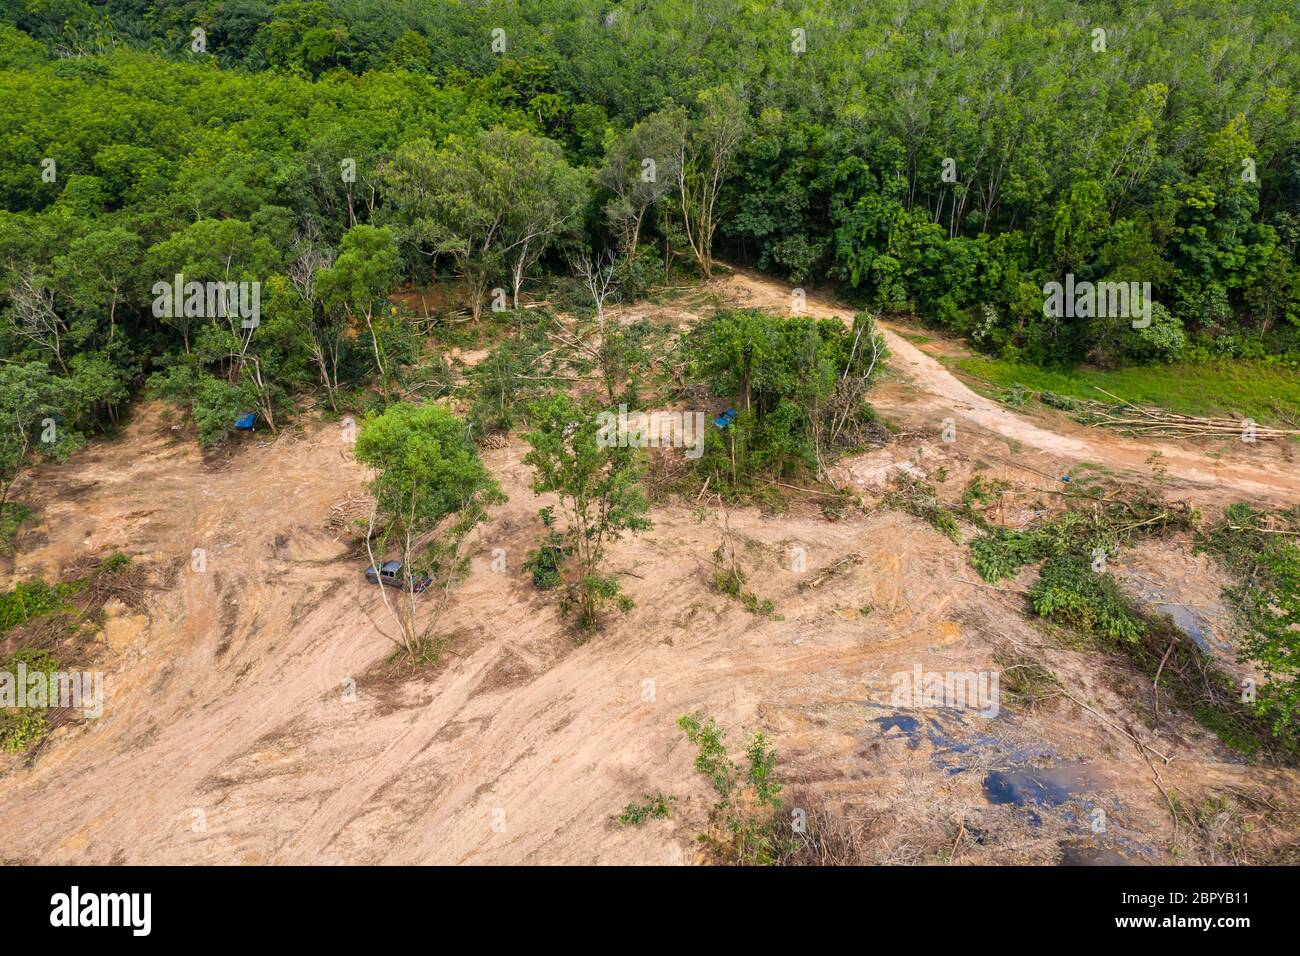 Aerial view of deforestation of a tropical rainforest to make way for logging and palm oil plantations contributing to climate change and global warmi Stock Photo